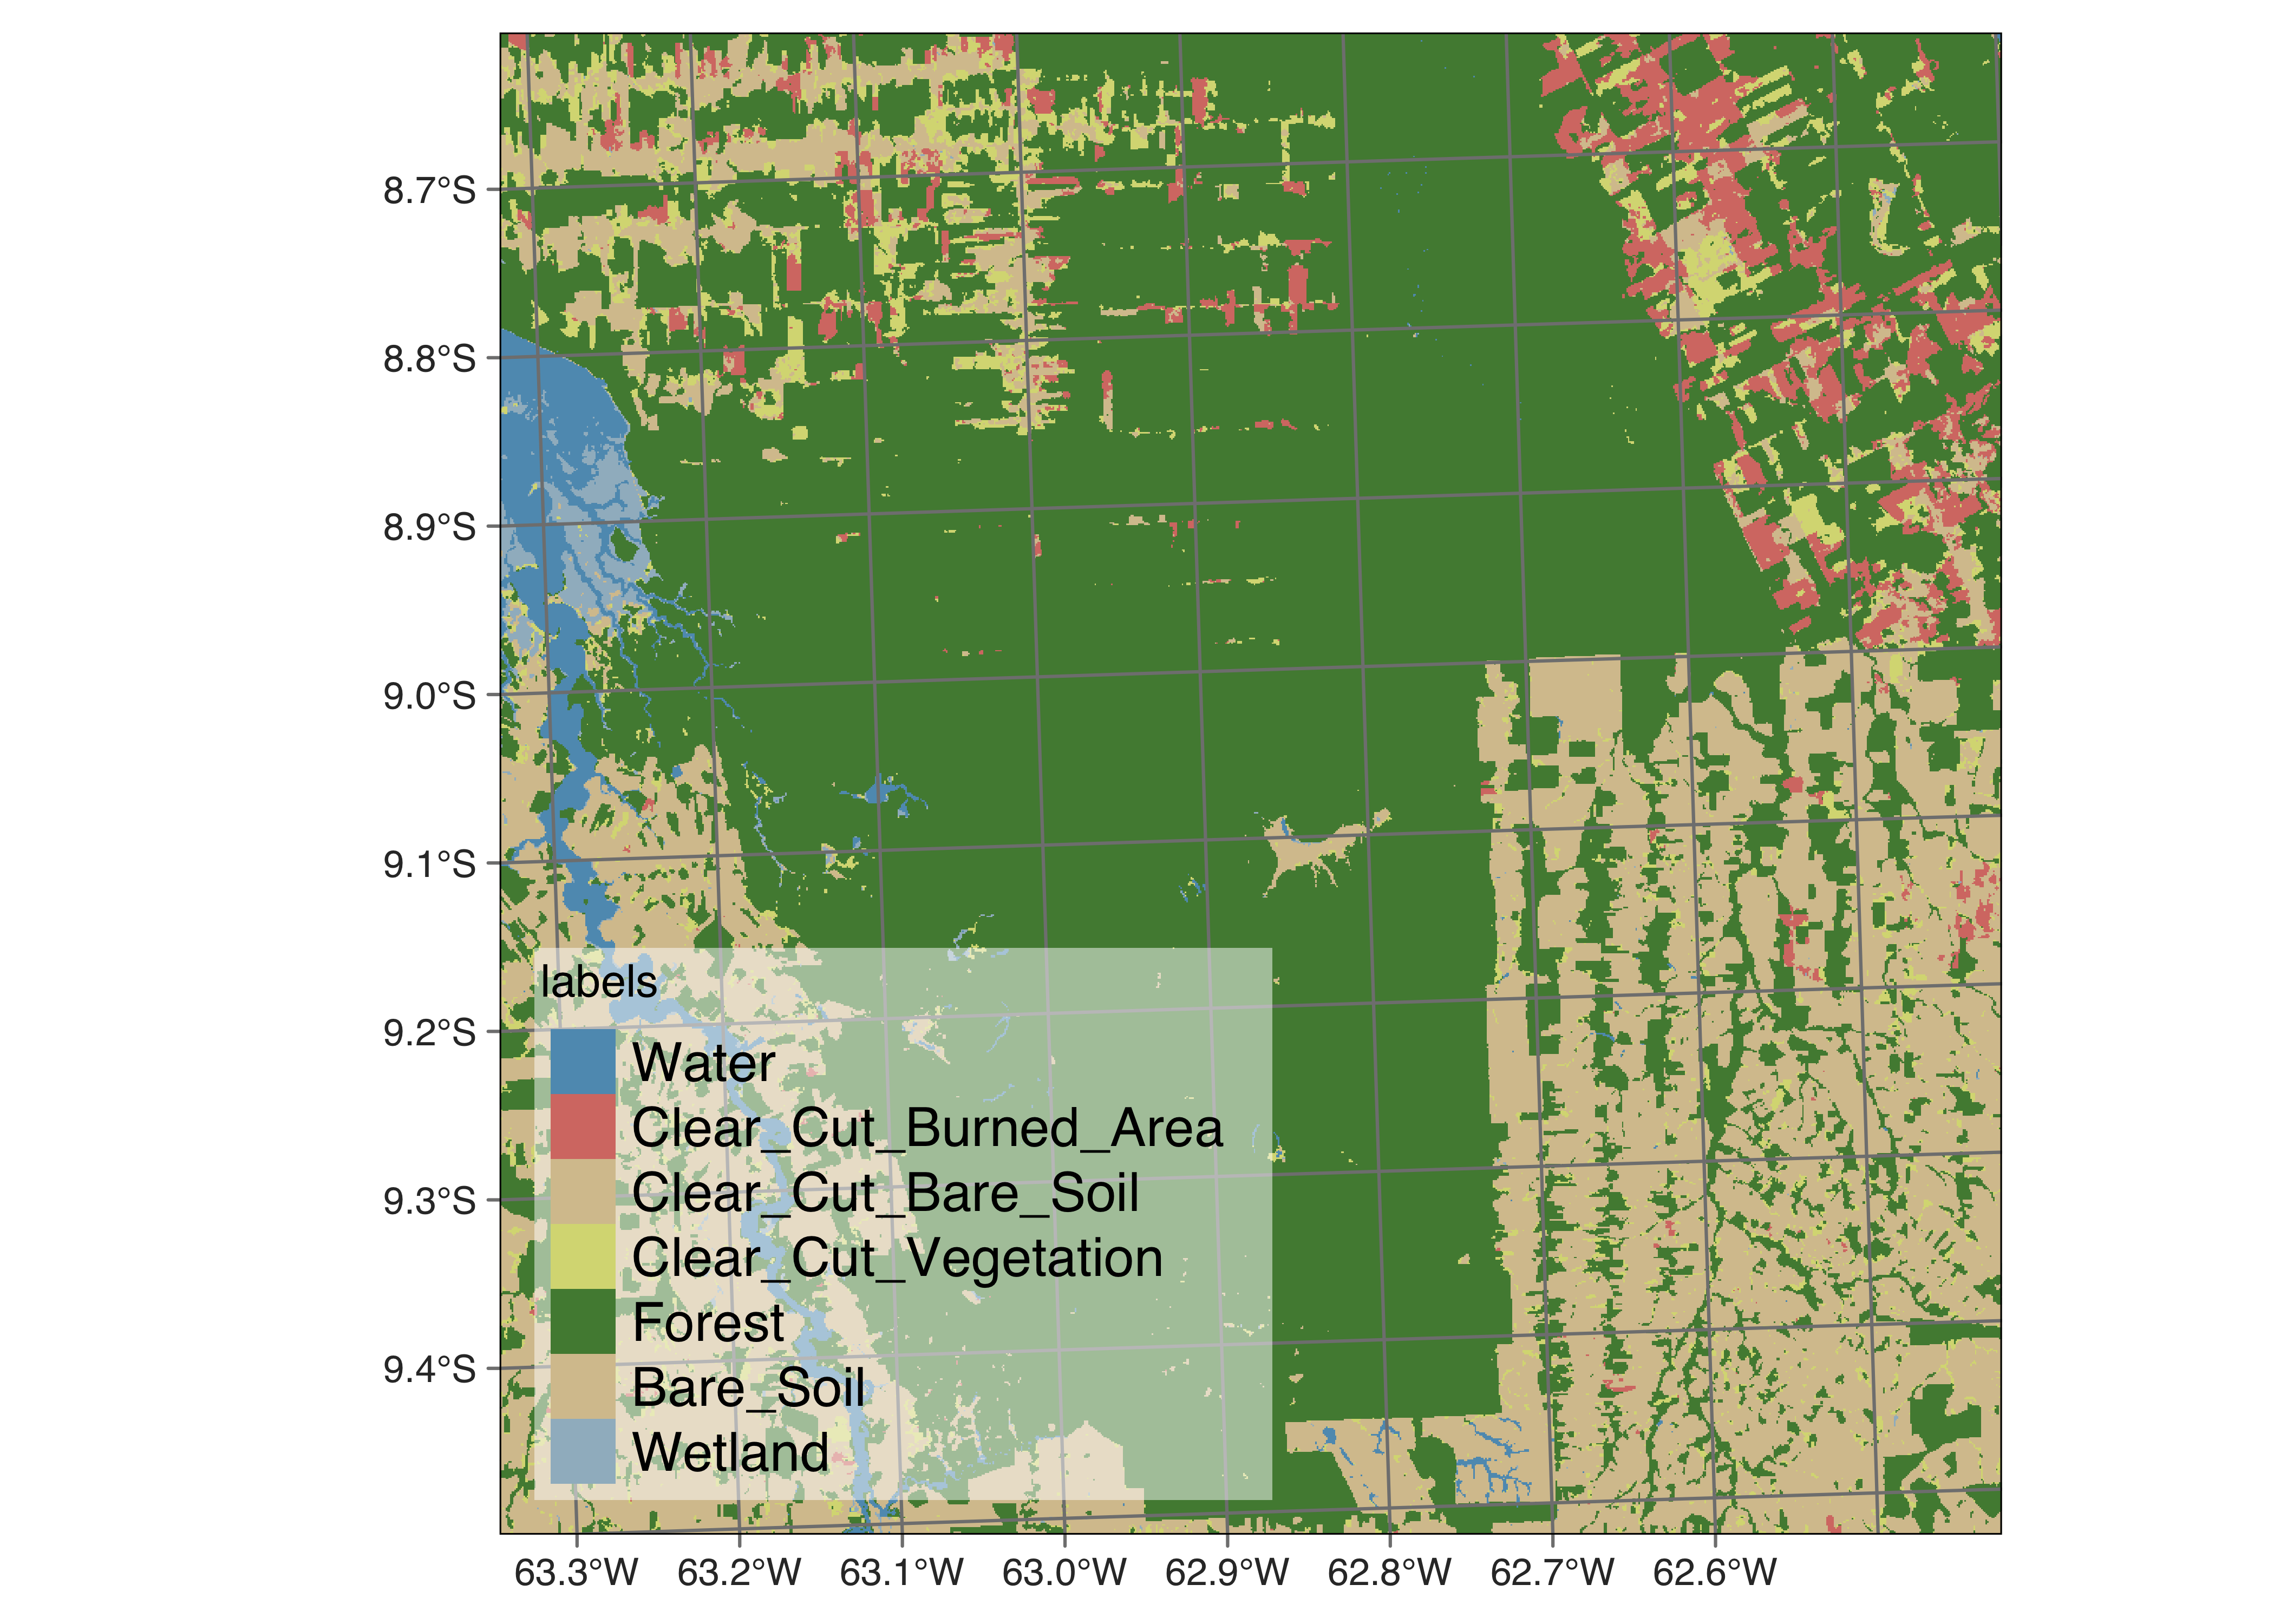 Deforestation map by sits masked by PRODES map (Source: Authors).